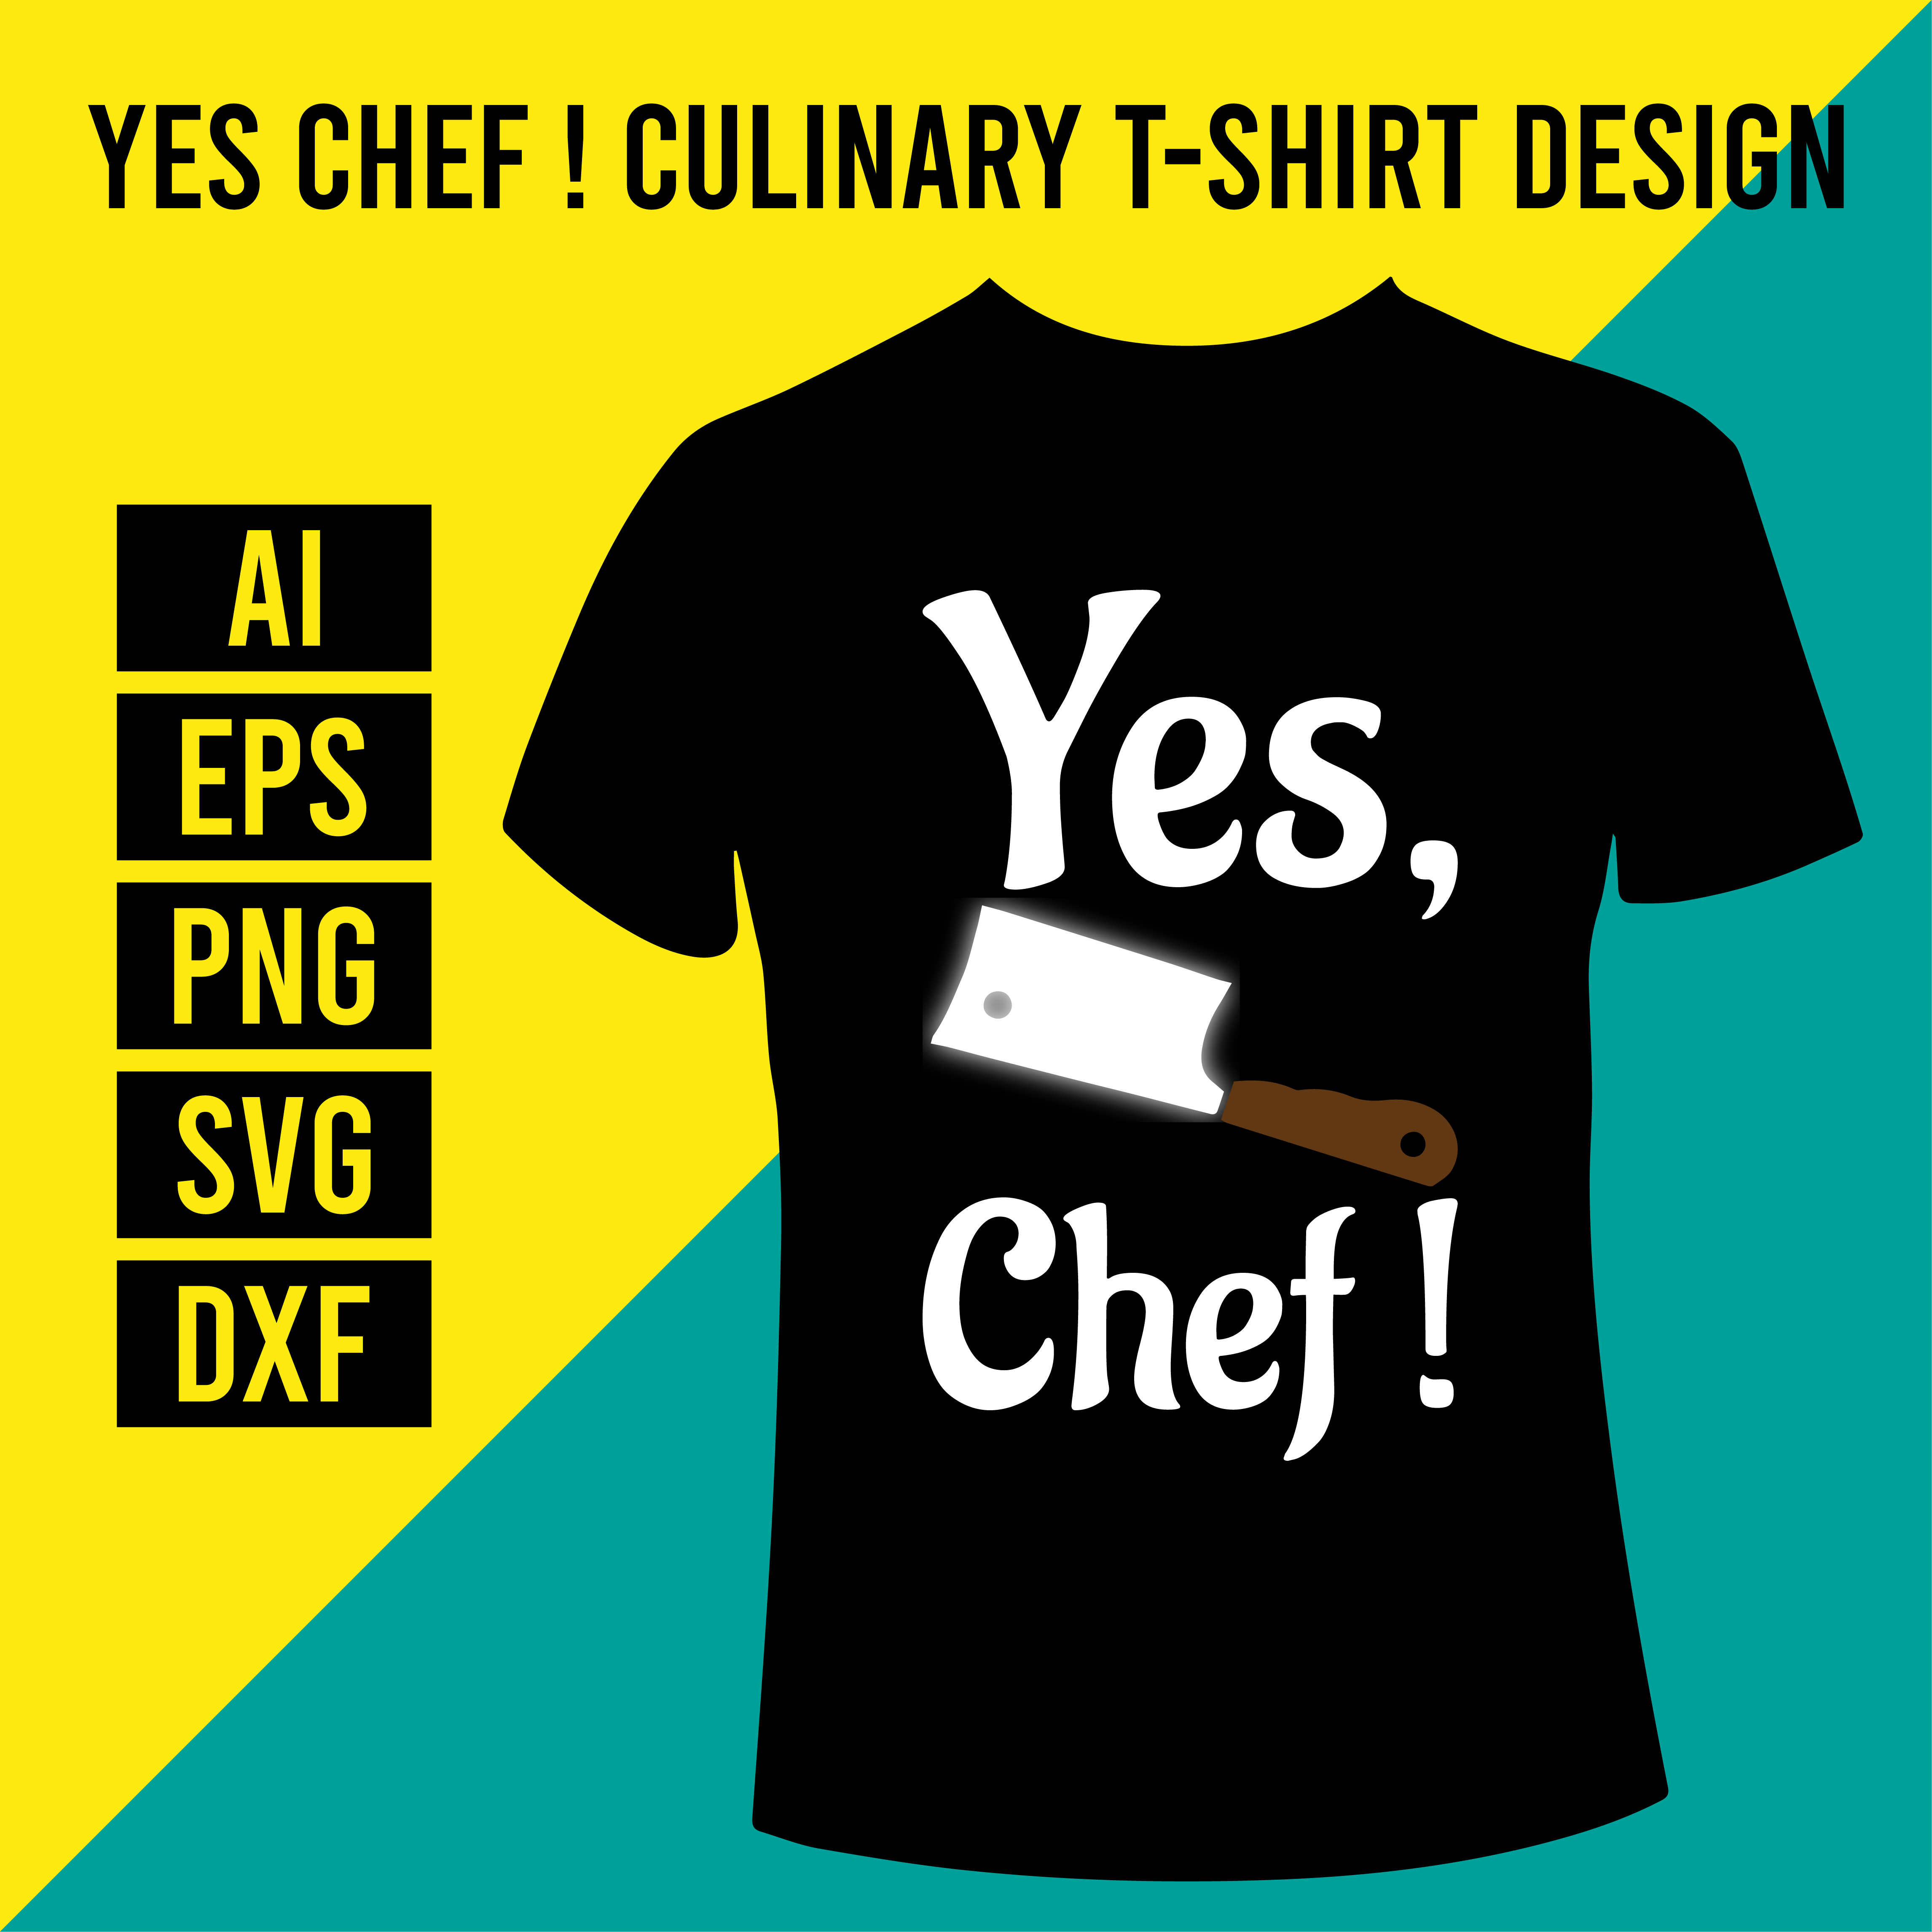 Yes Chef ! Culinary T-Shirt Design cover image.